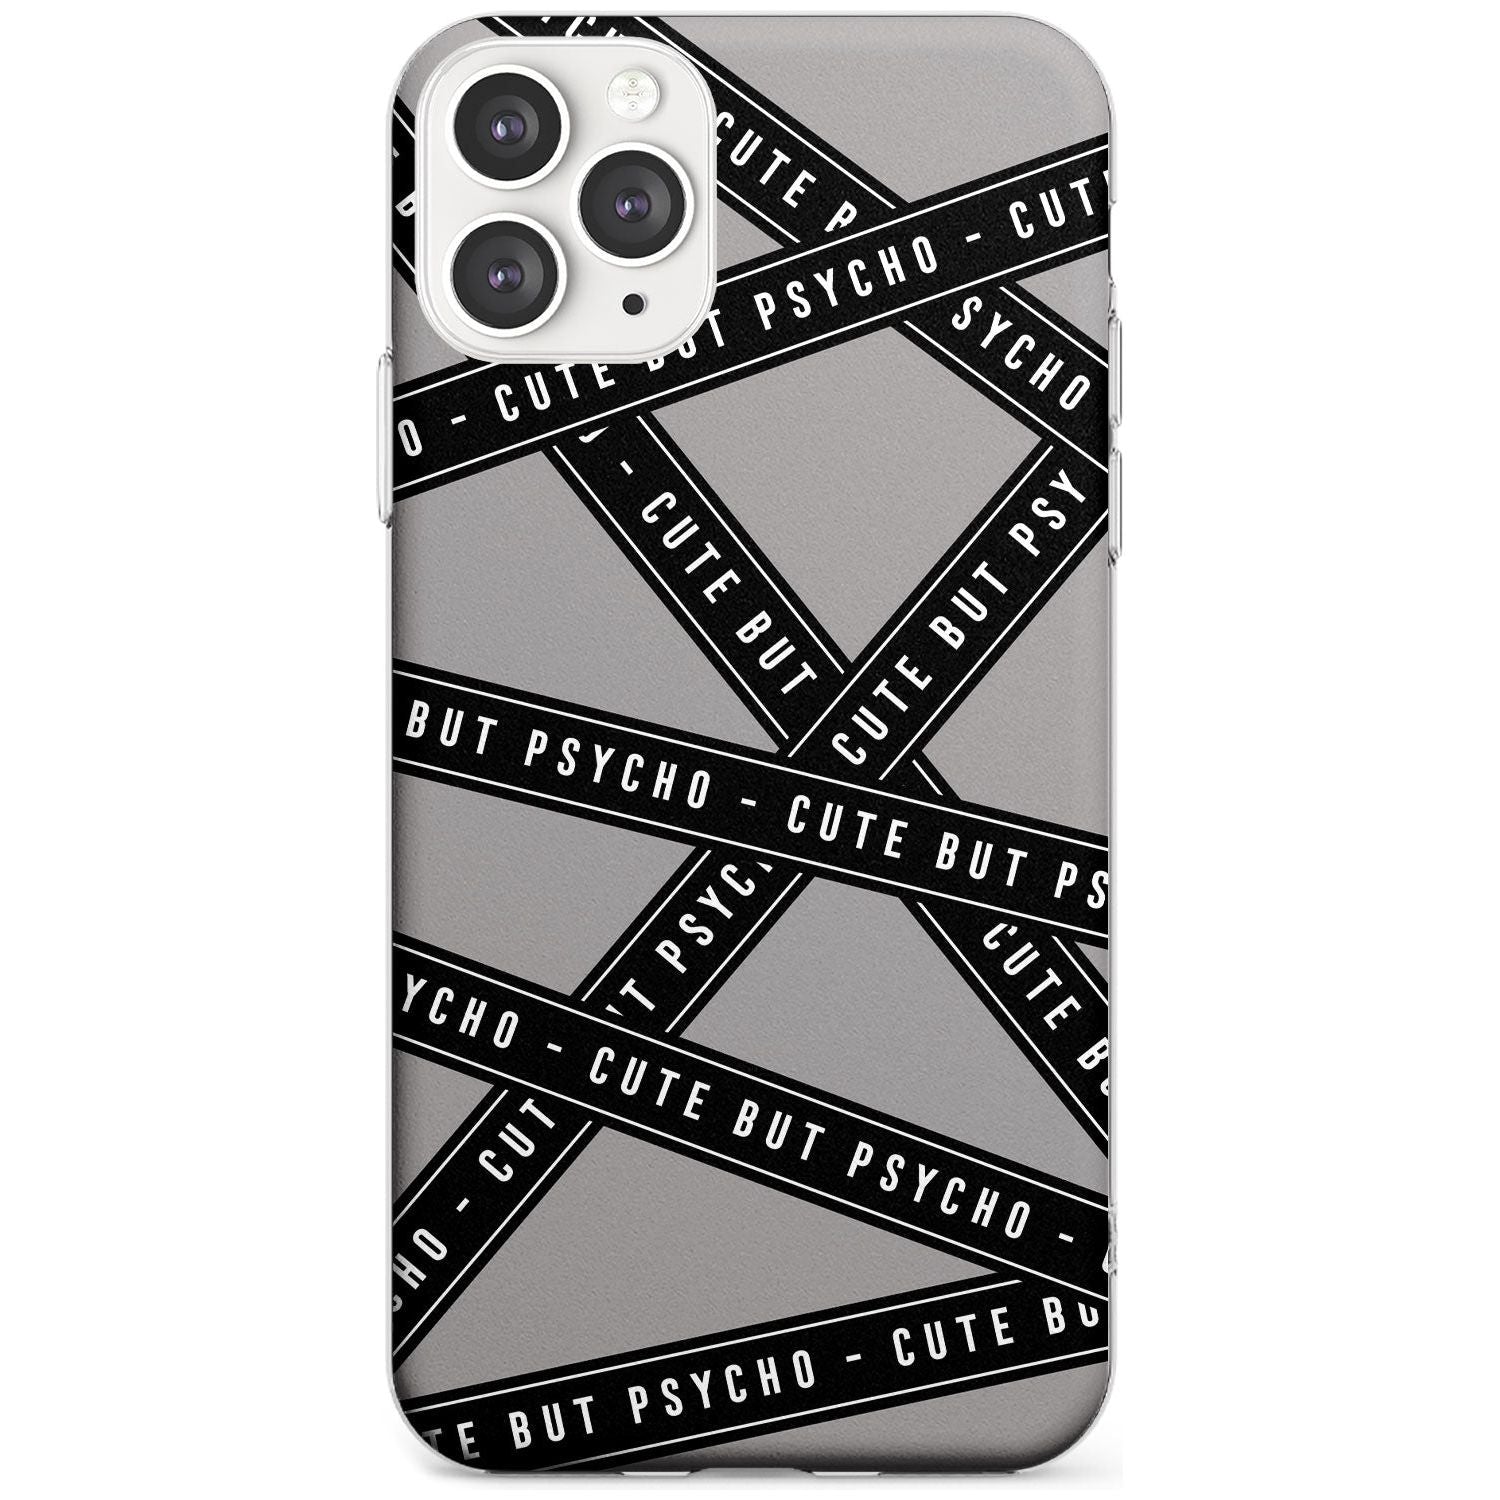 Caution Tape Phrases Cute But Psycho Slim TPU Phone Case for iPhone 11 Pro Max